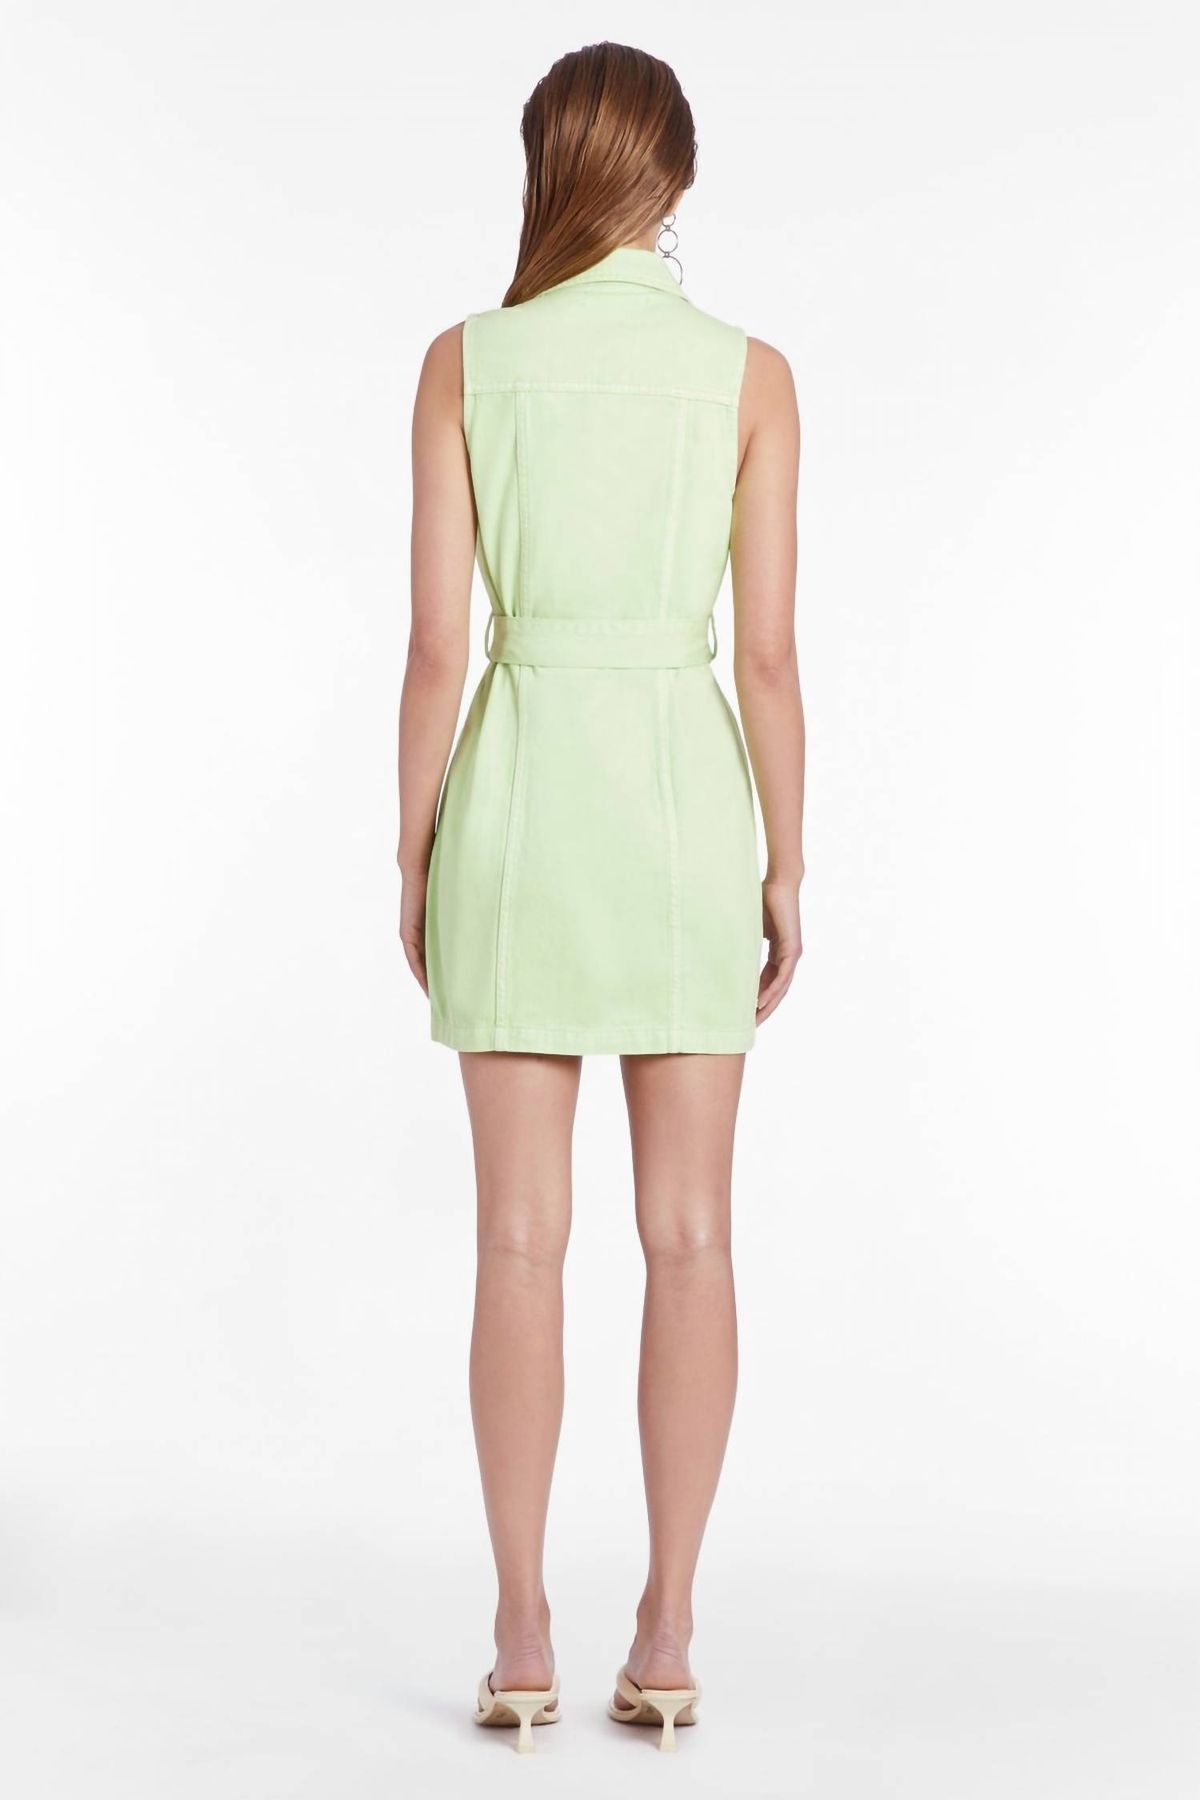 Style 1-1654856999-3855 Amanda Uprichard Size XS High Neck Green Cocktail Dress on Queenly